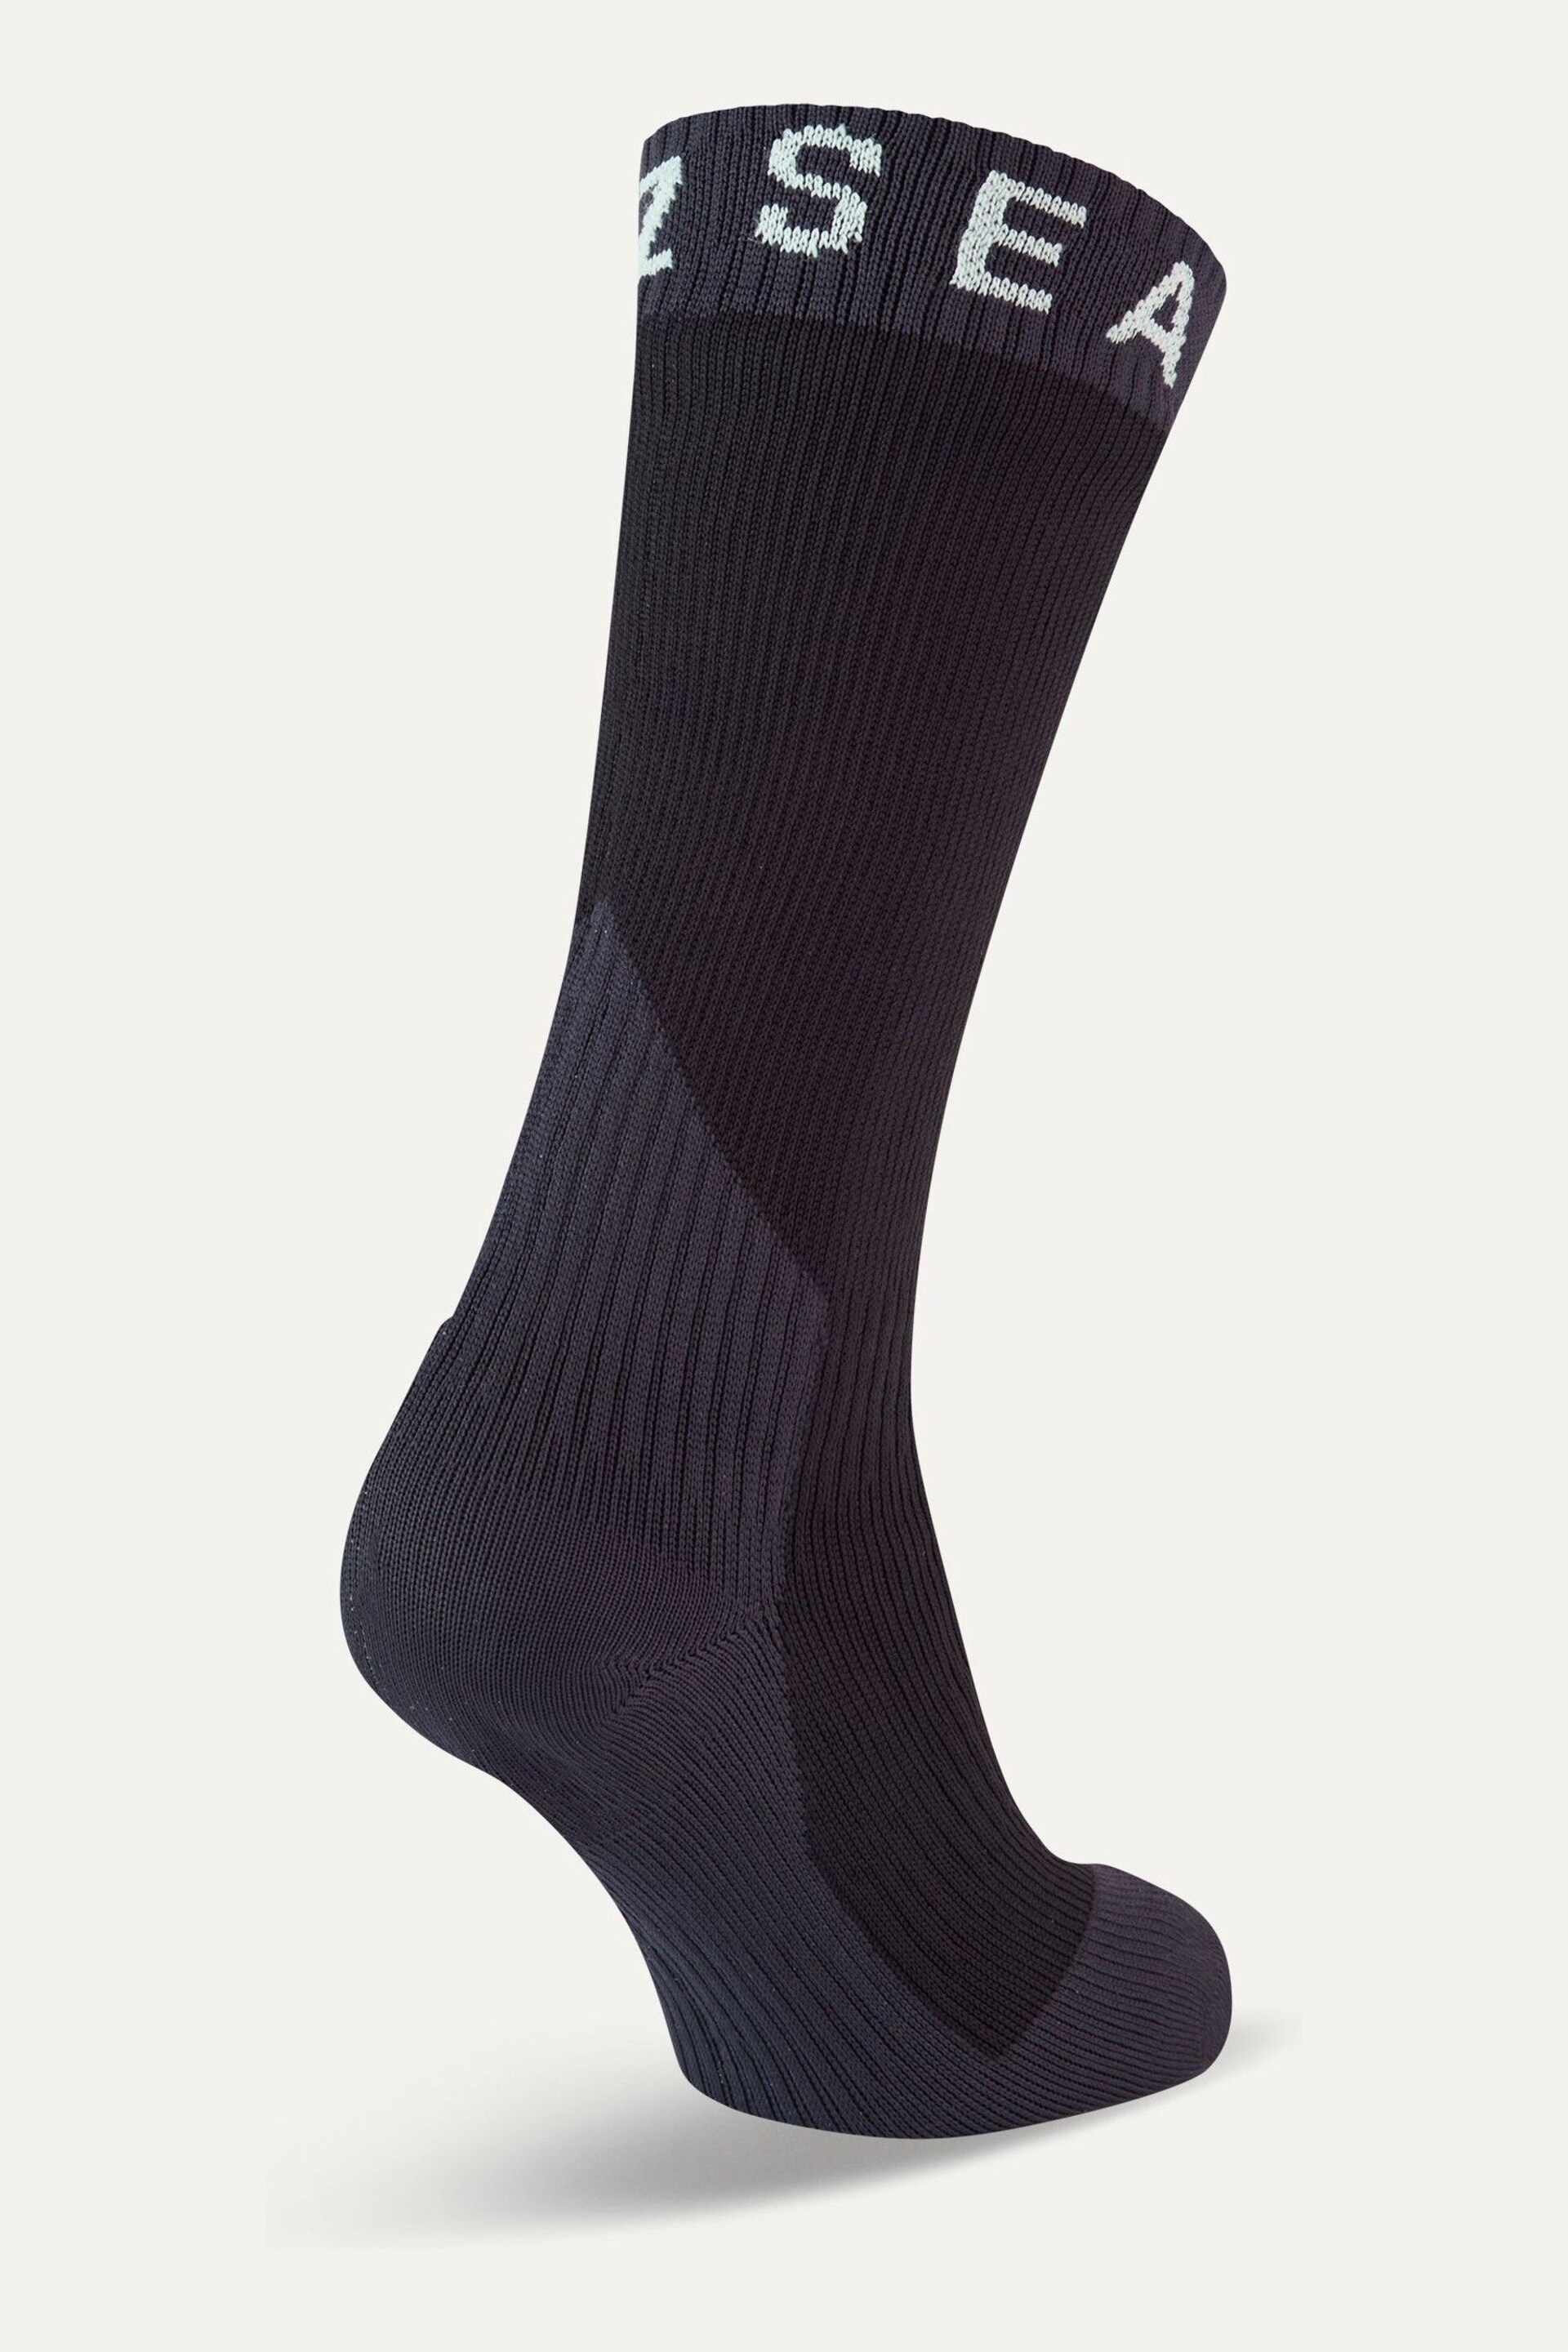 Sealskinz Stanfield Waterproof Extreme Cold Weather Mid Length Black Socks - Image 2 of 2